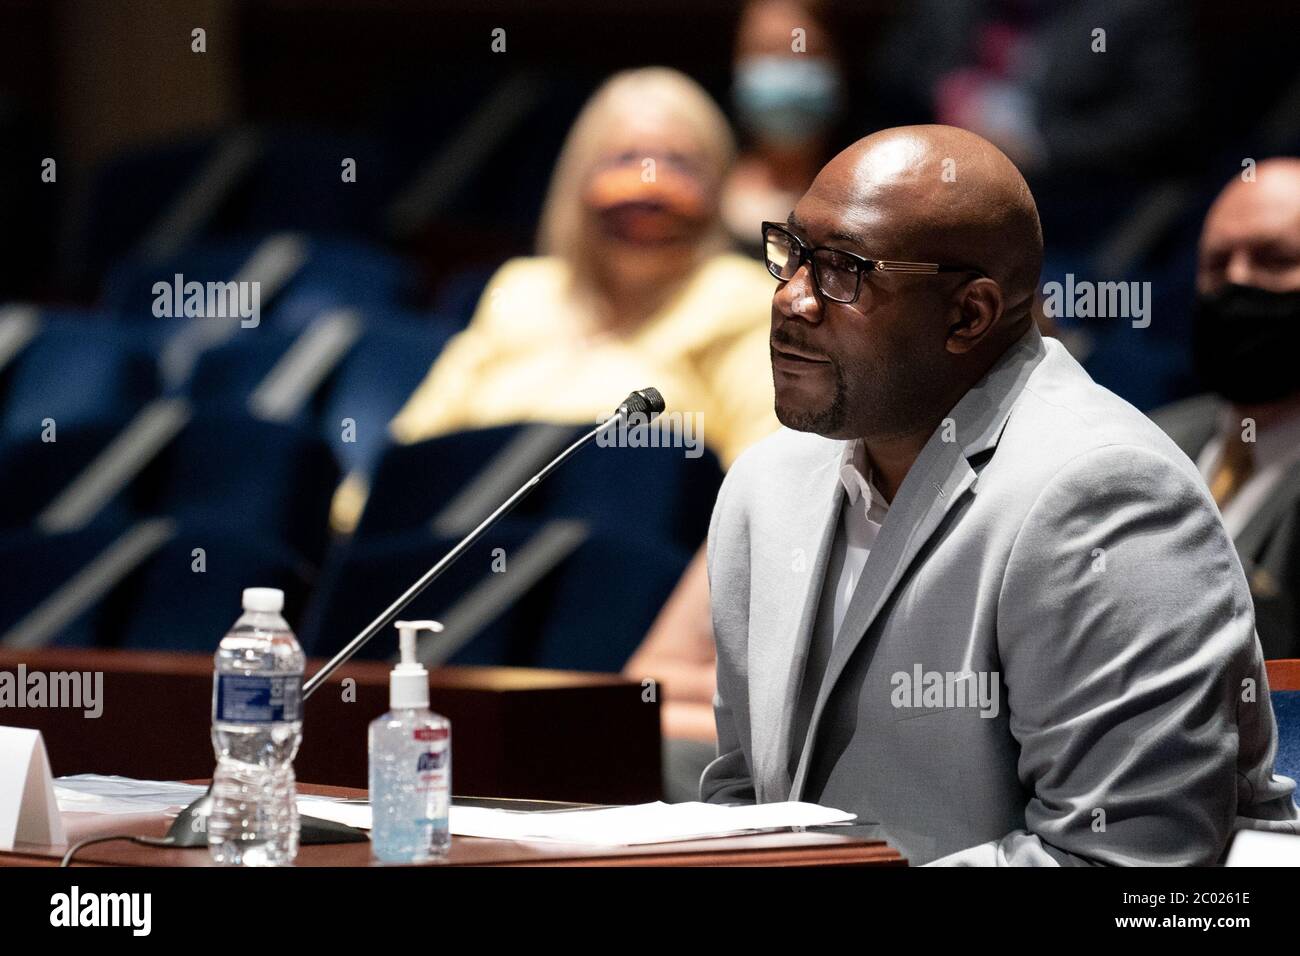 (200611) -- WASHINGTON D.C., June 11, 2020 (Xinhua) -- Philonise Floyd, brother of George Floyd, attends the House Judiciary Committee's hearing titled 'Policing Practices and Law Enforcement Accountability' in Washington, DC, the United States on June 10, 2020. (Erin Schaff/Pool via Xinhua) Stock Photo